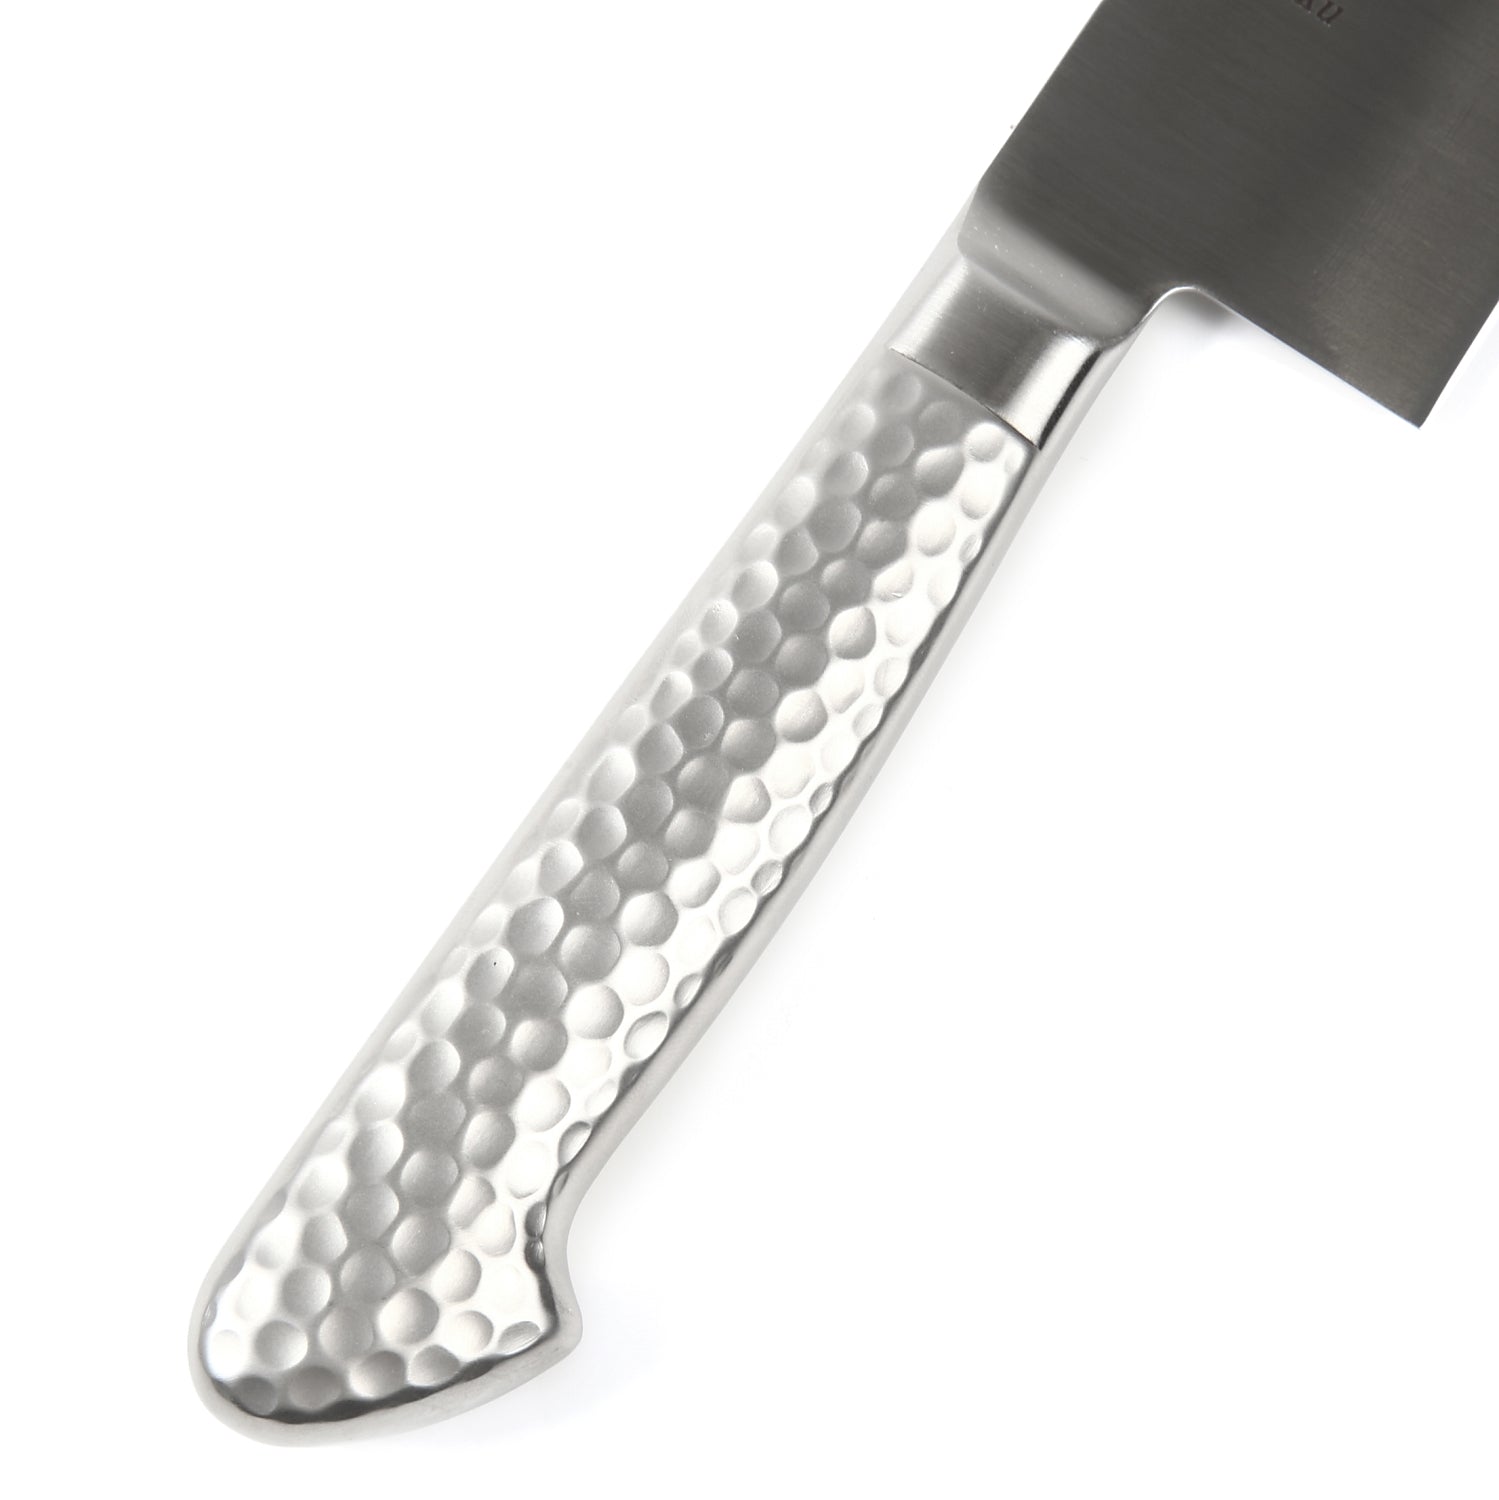 Syosaku Japanese Chef Knife INOX AUS-8A Stainless Steel Integrated Handle, Gyuto 8.3-inch (210mm)